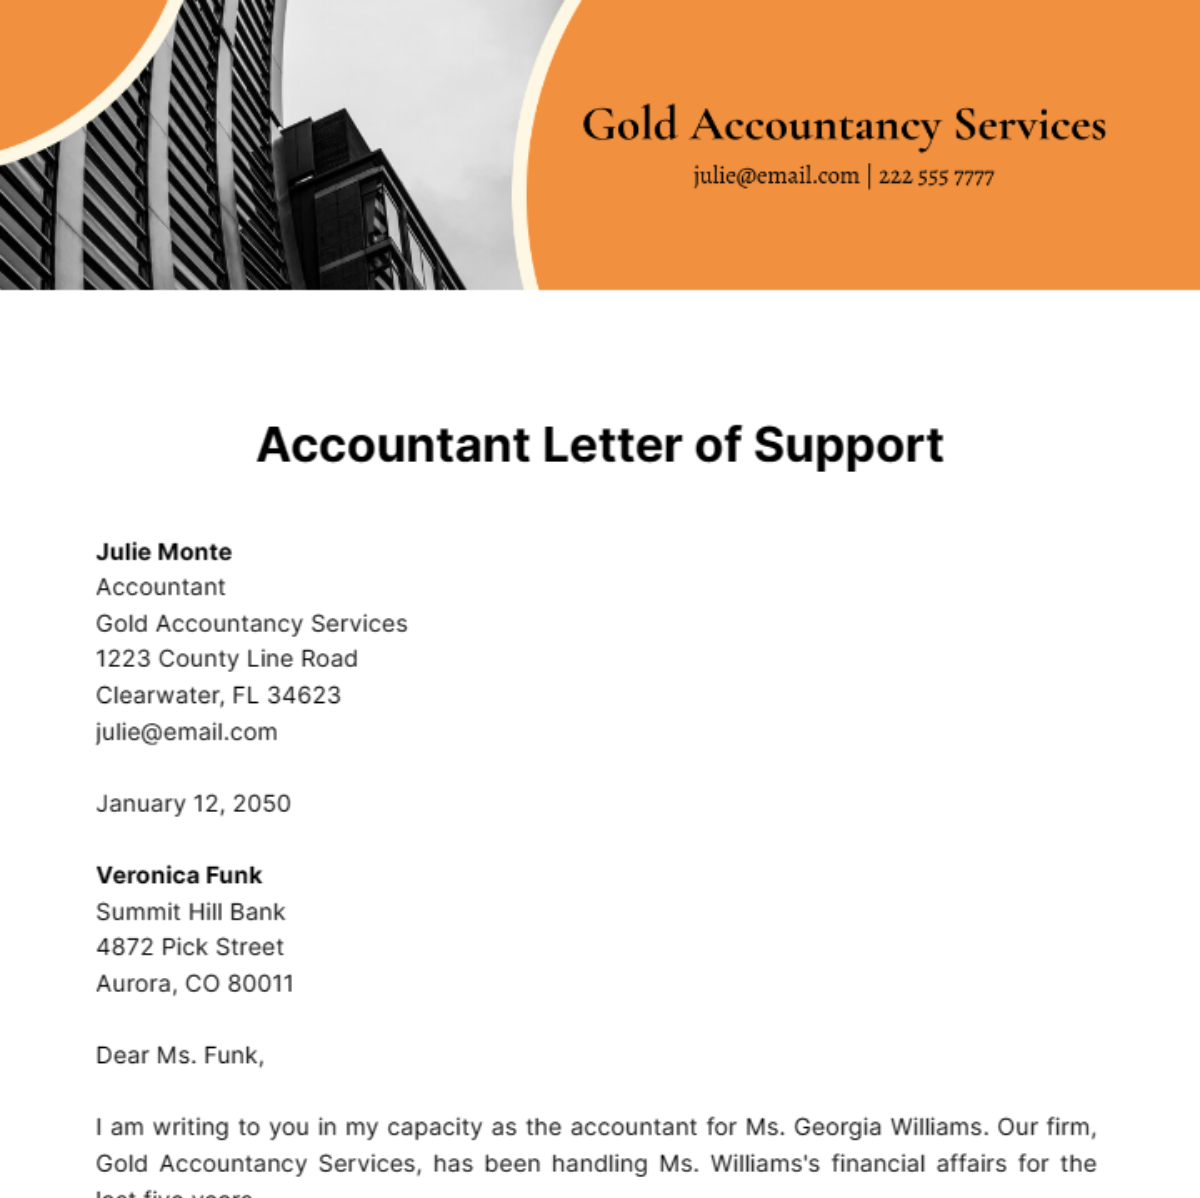 Accountant Letter of Support Template